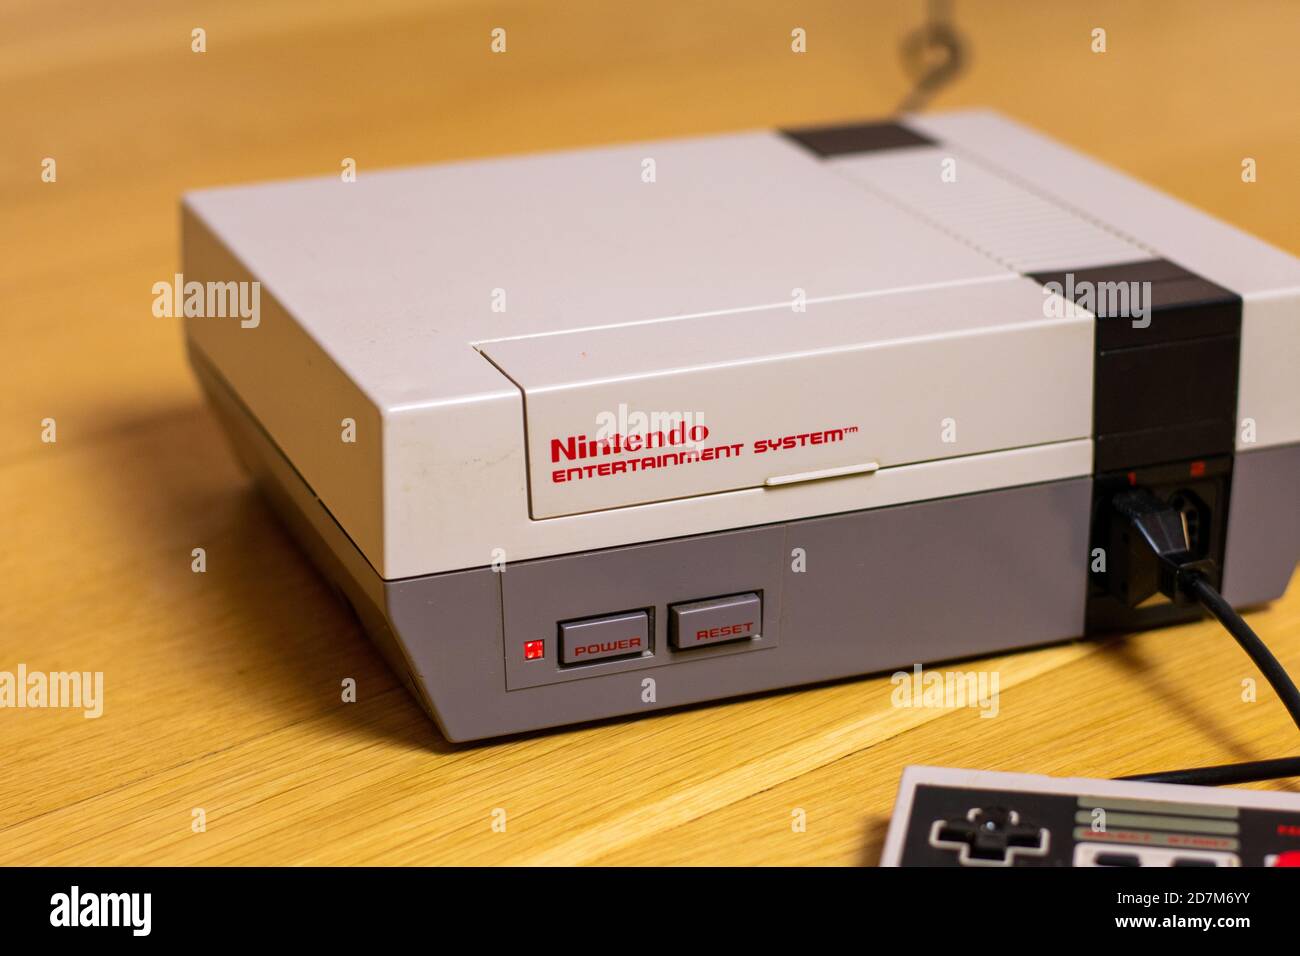 A Nintendo Entertainment System With a Controller Plugged In. The NES is a popular retro console. Stock Photo